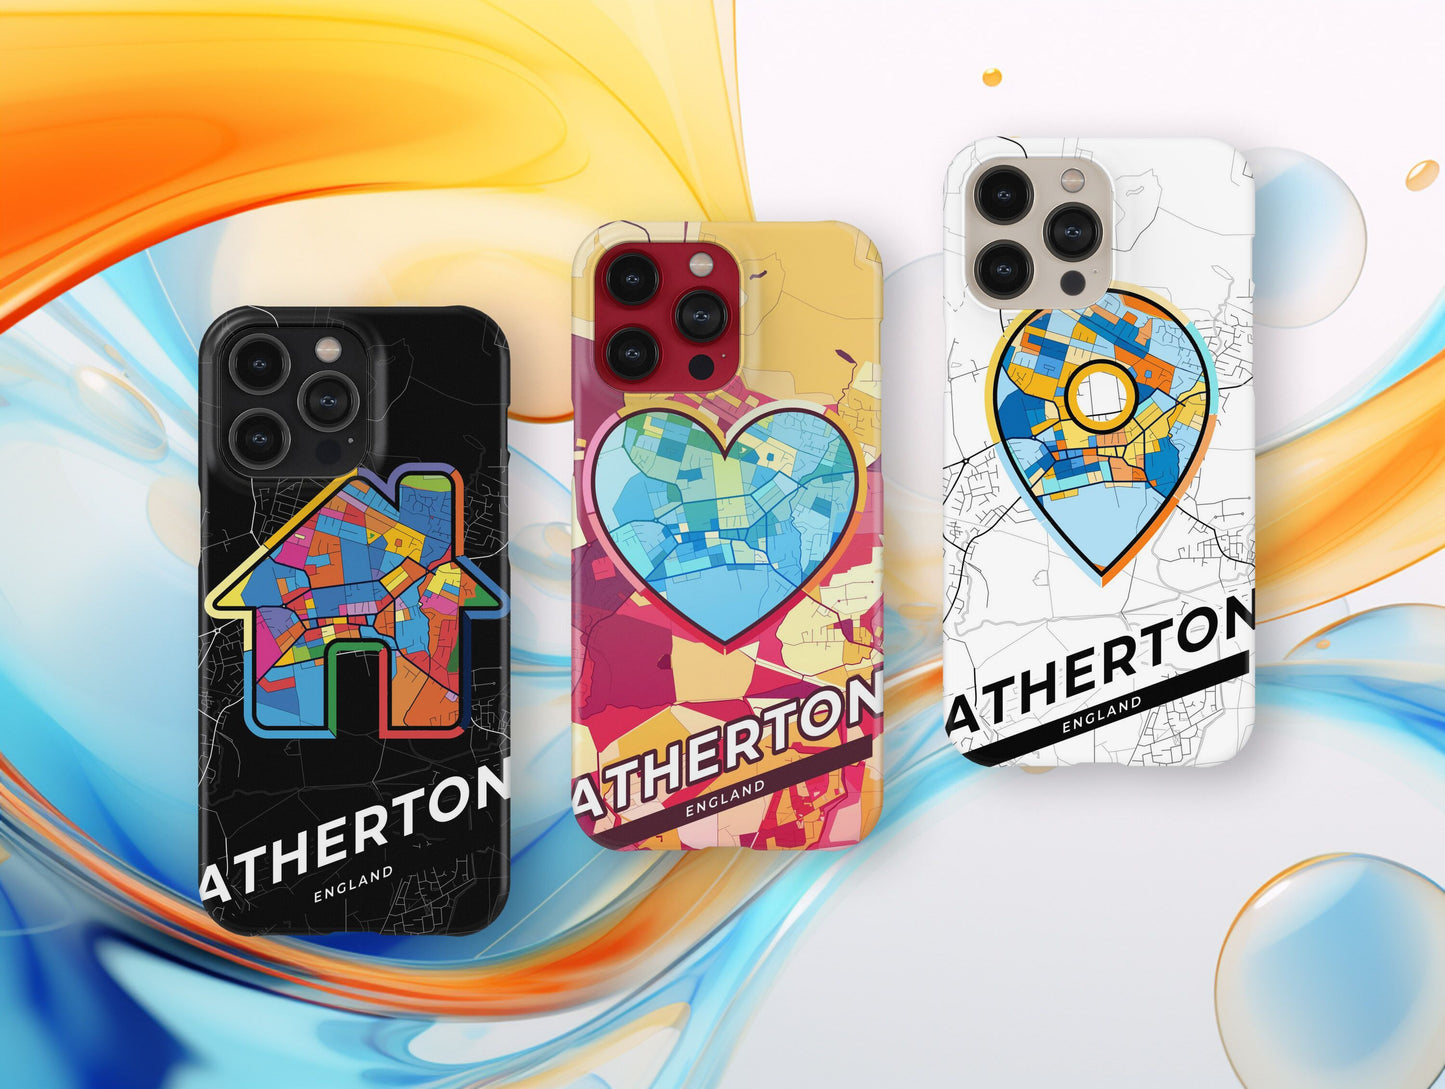 Atherton England slim phone case with colorful icon. Birthday, wedding or housewarming gift. Couple match cases.